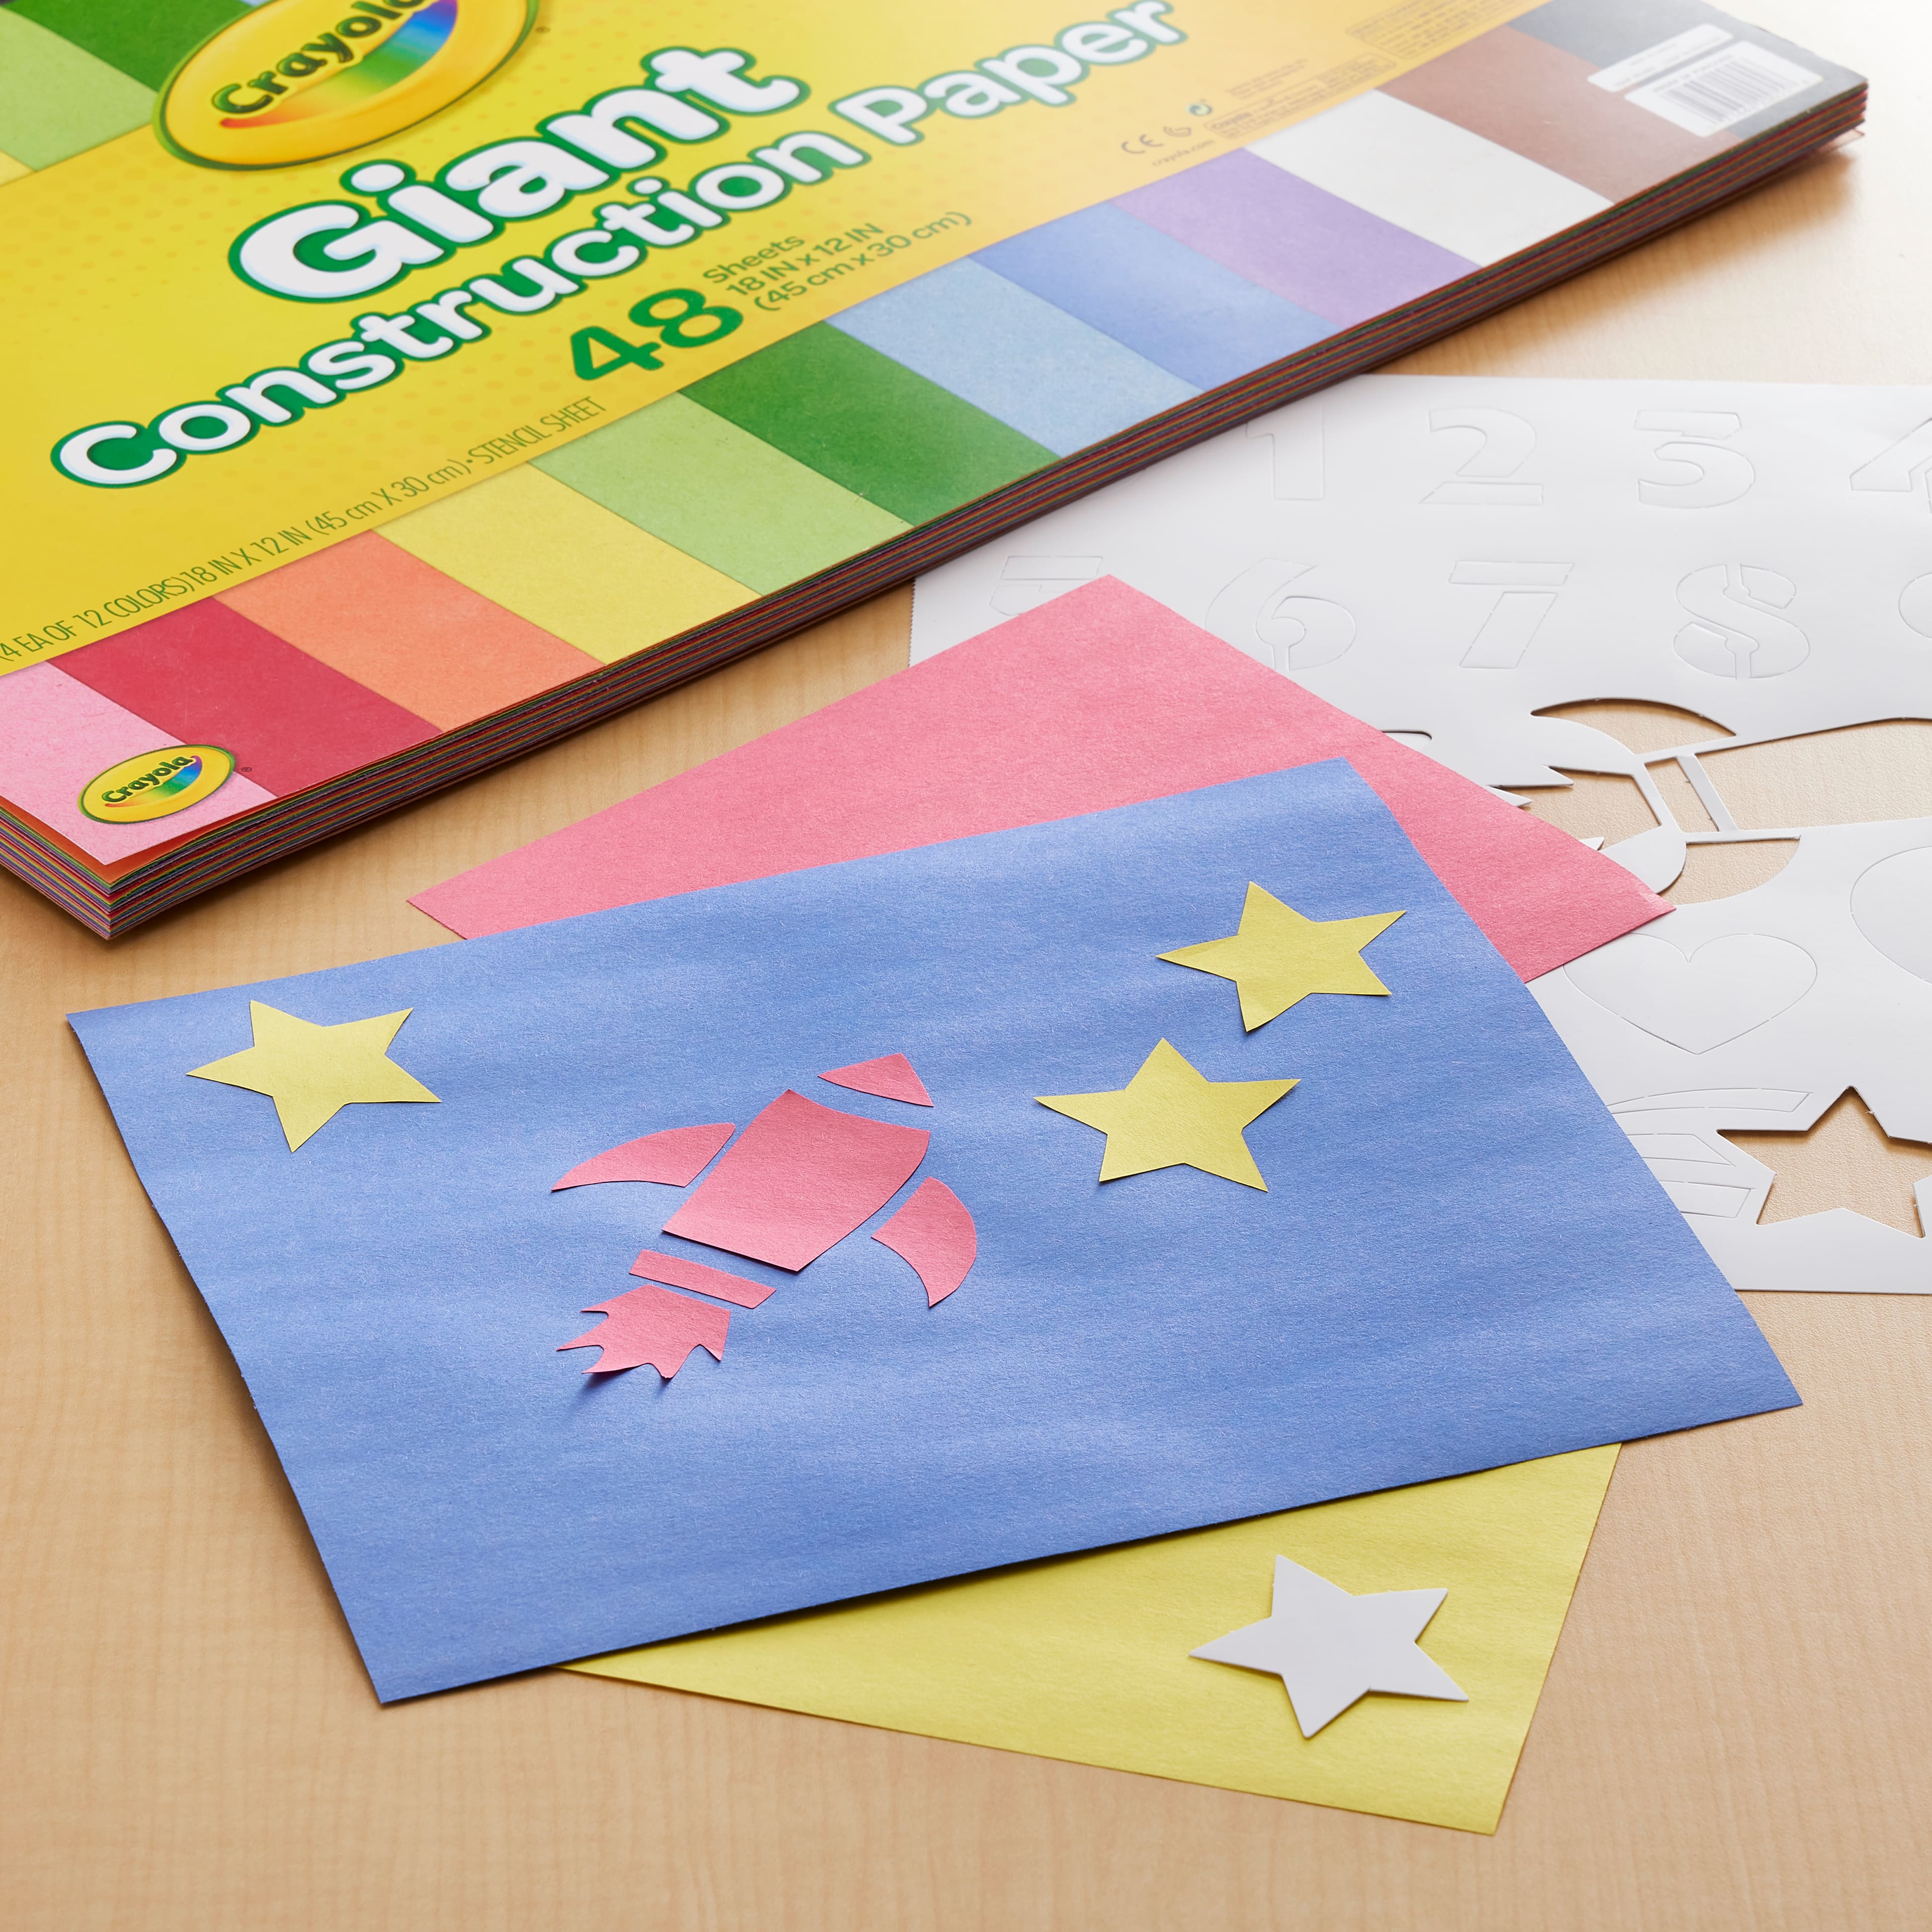 Crayola Project Giant Construction Paper 12X18-48 Sheets - Assorted Colors  W/Stencils - 071662300784